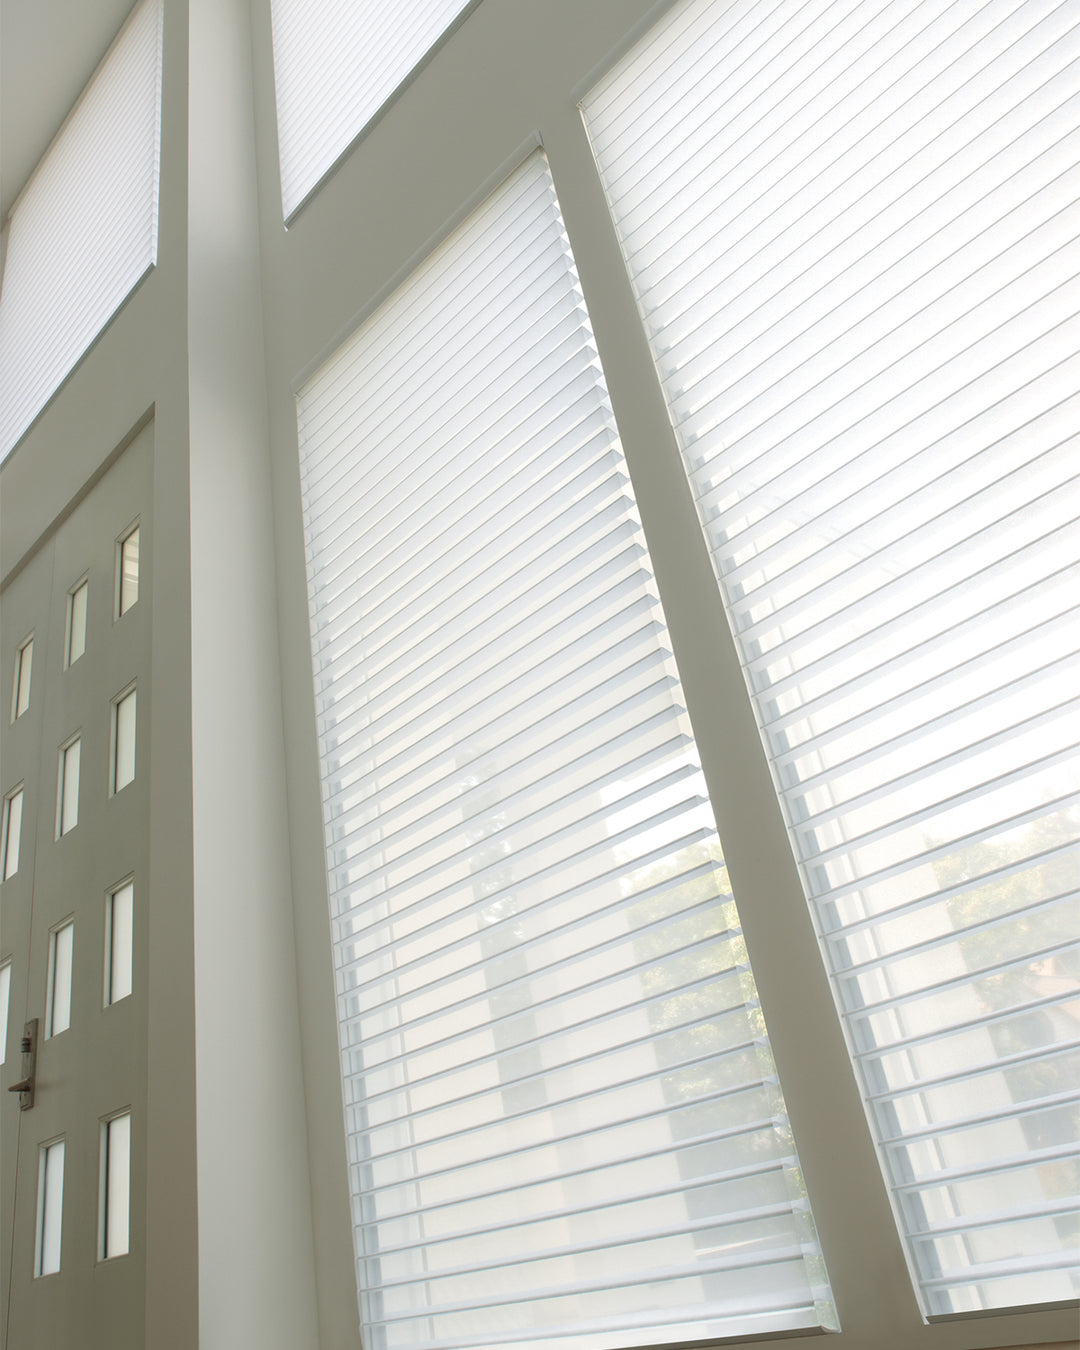 Windows with sheer white blinds